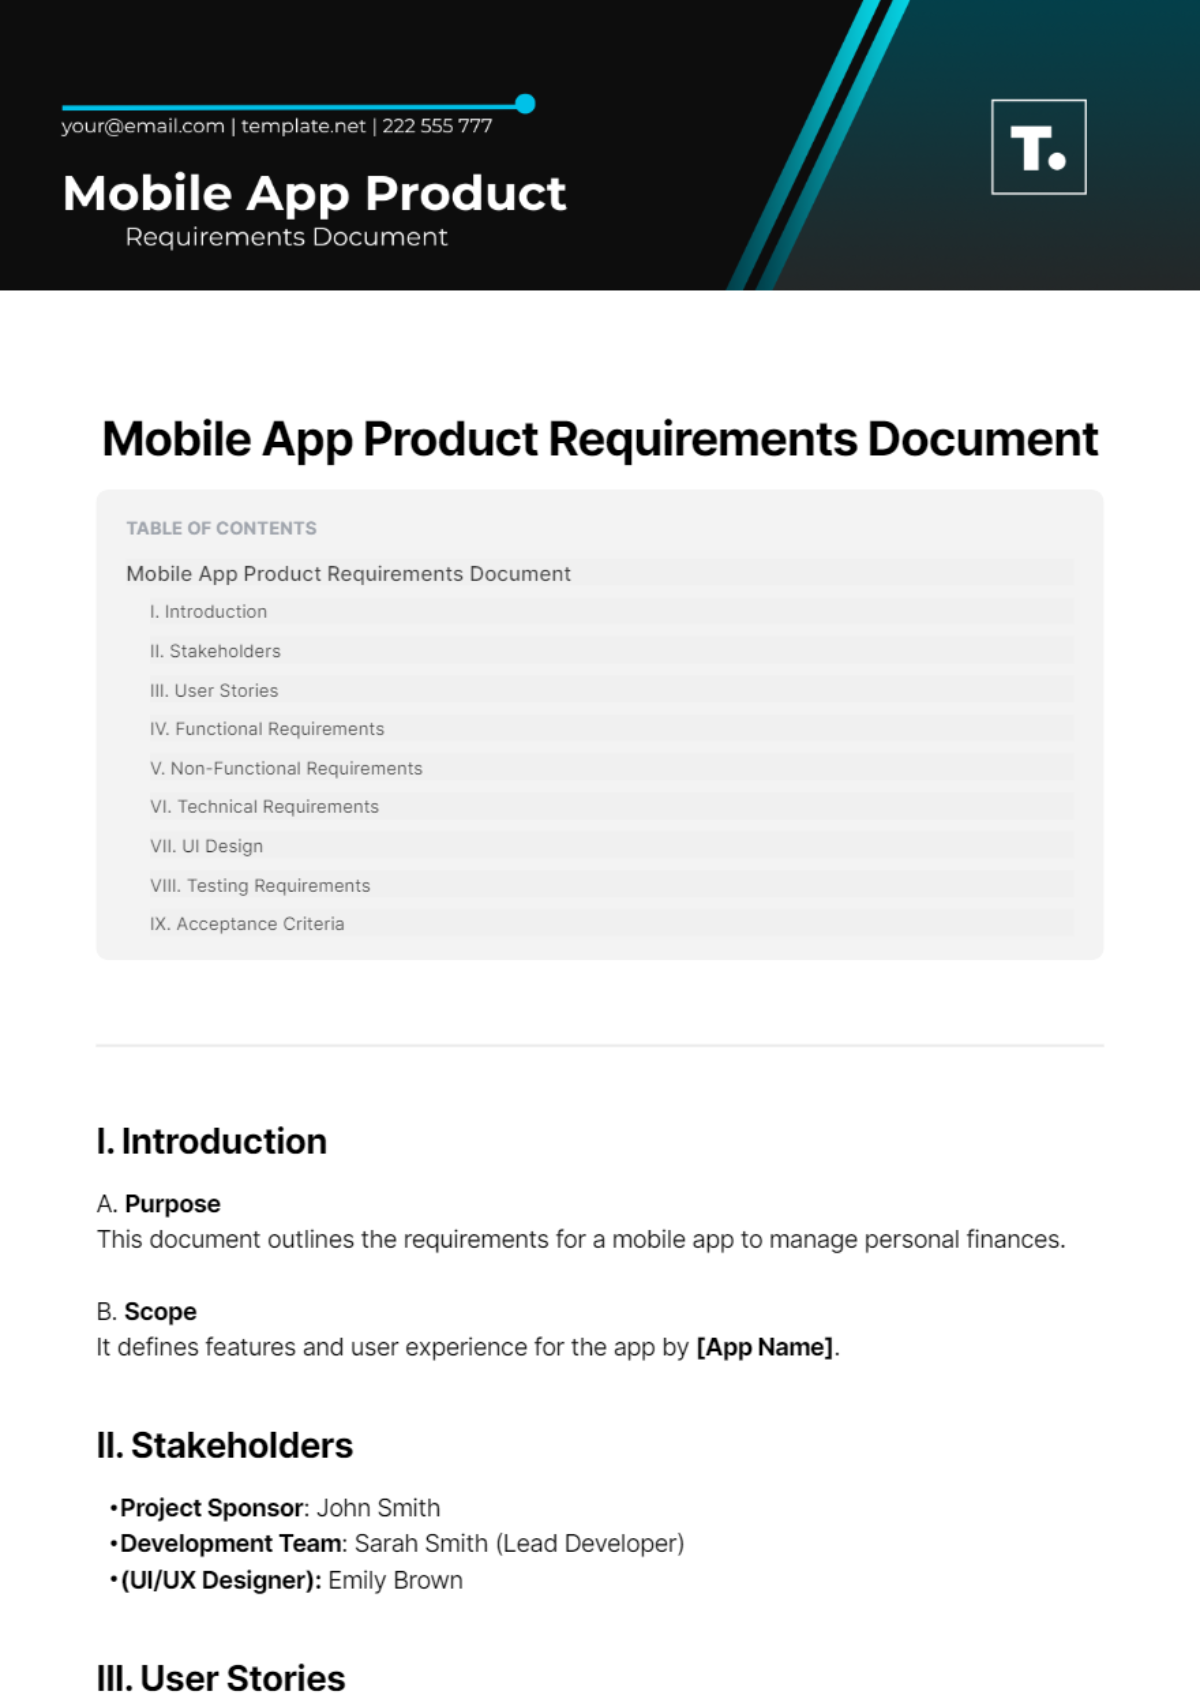 Mobile App Product Requirements Document Template